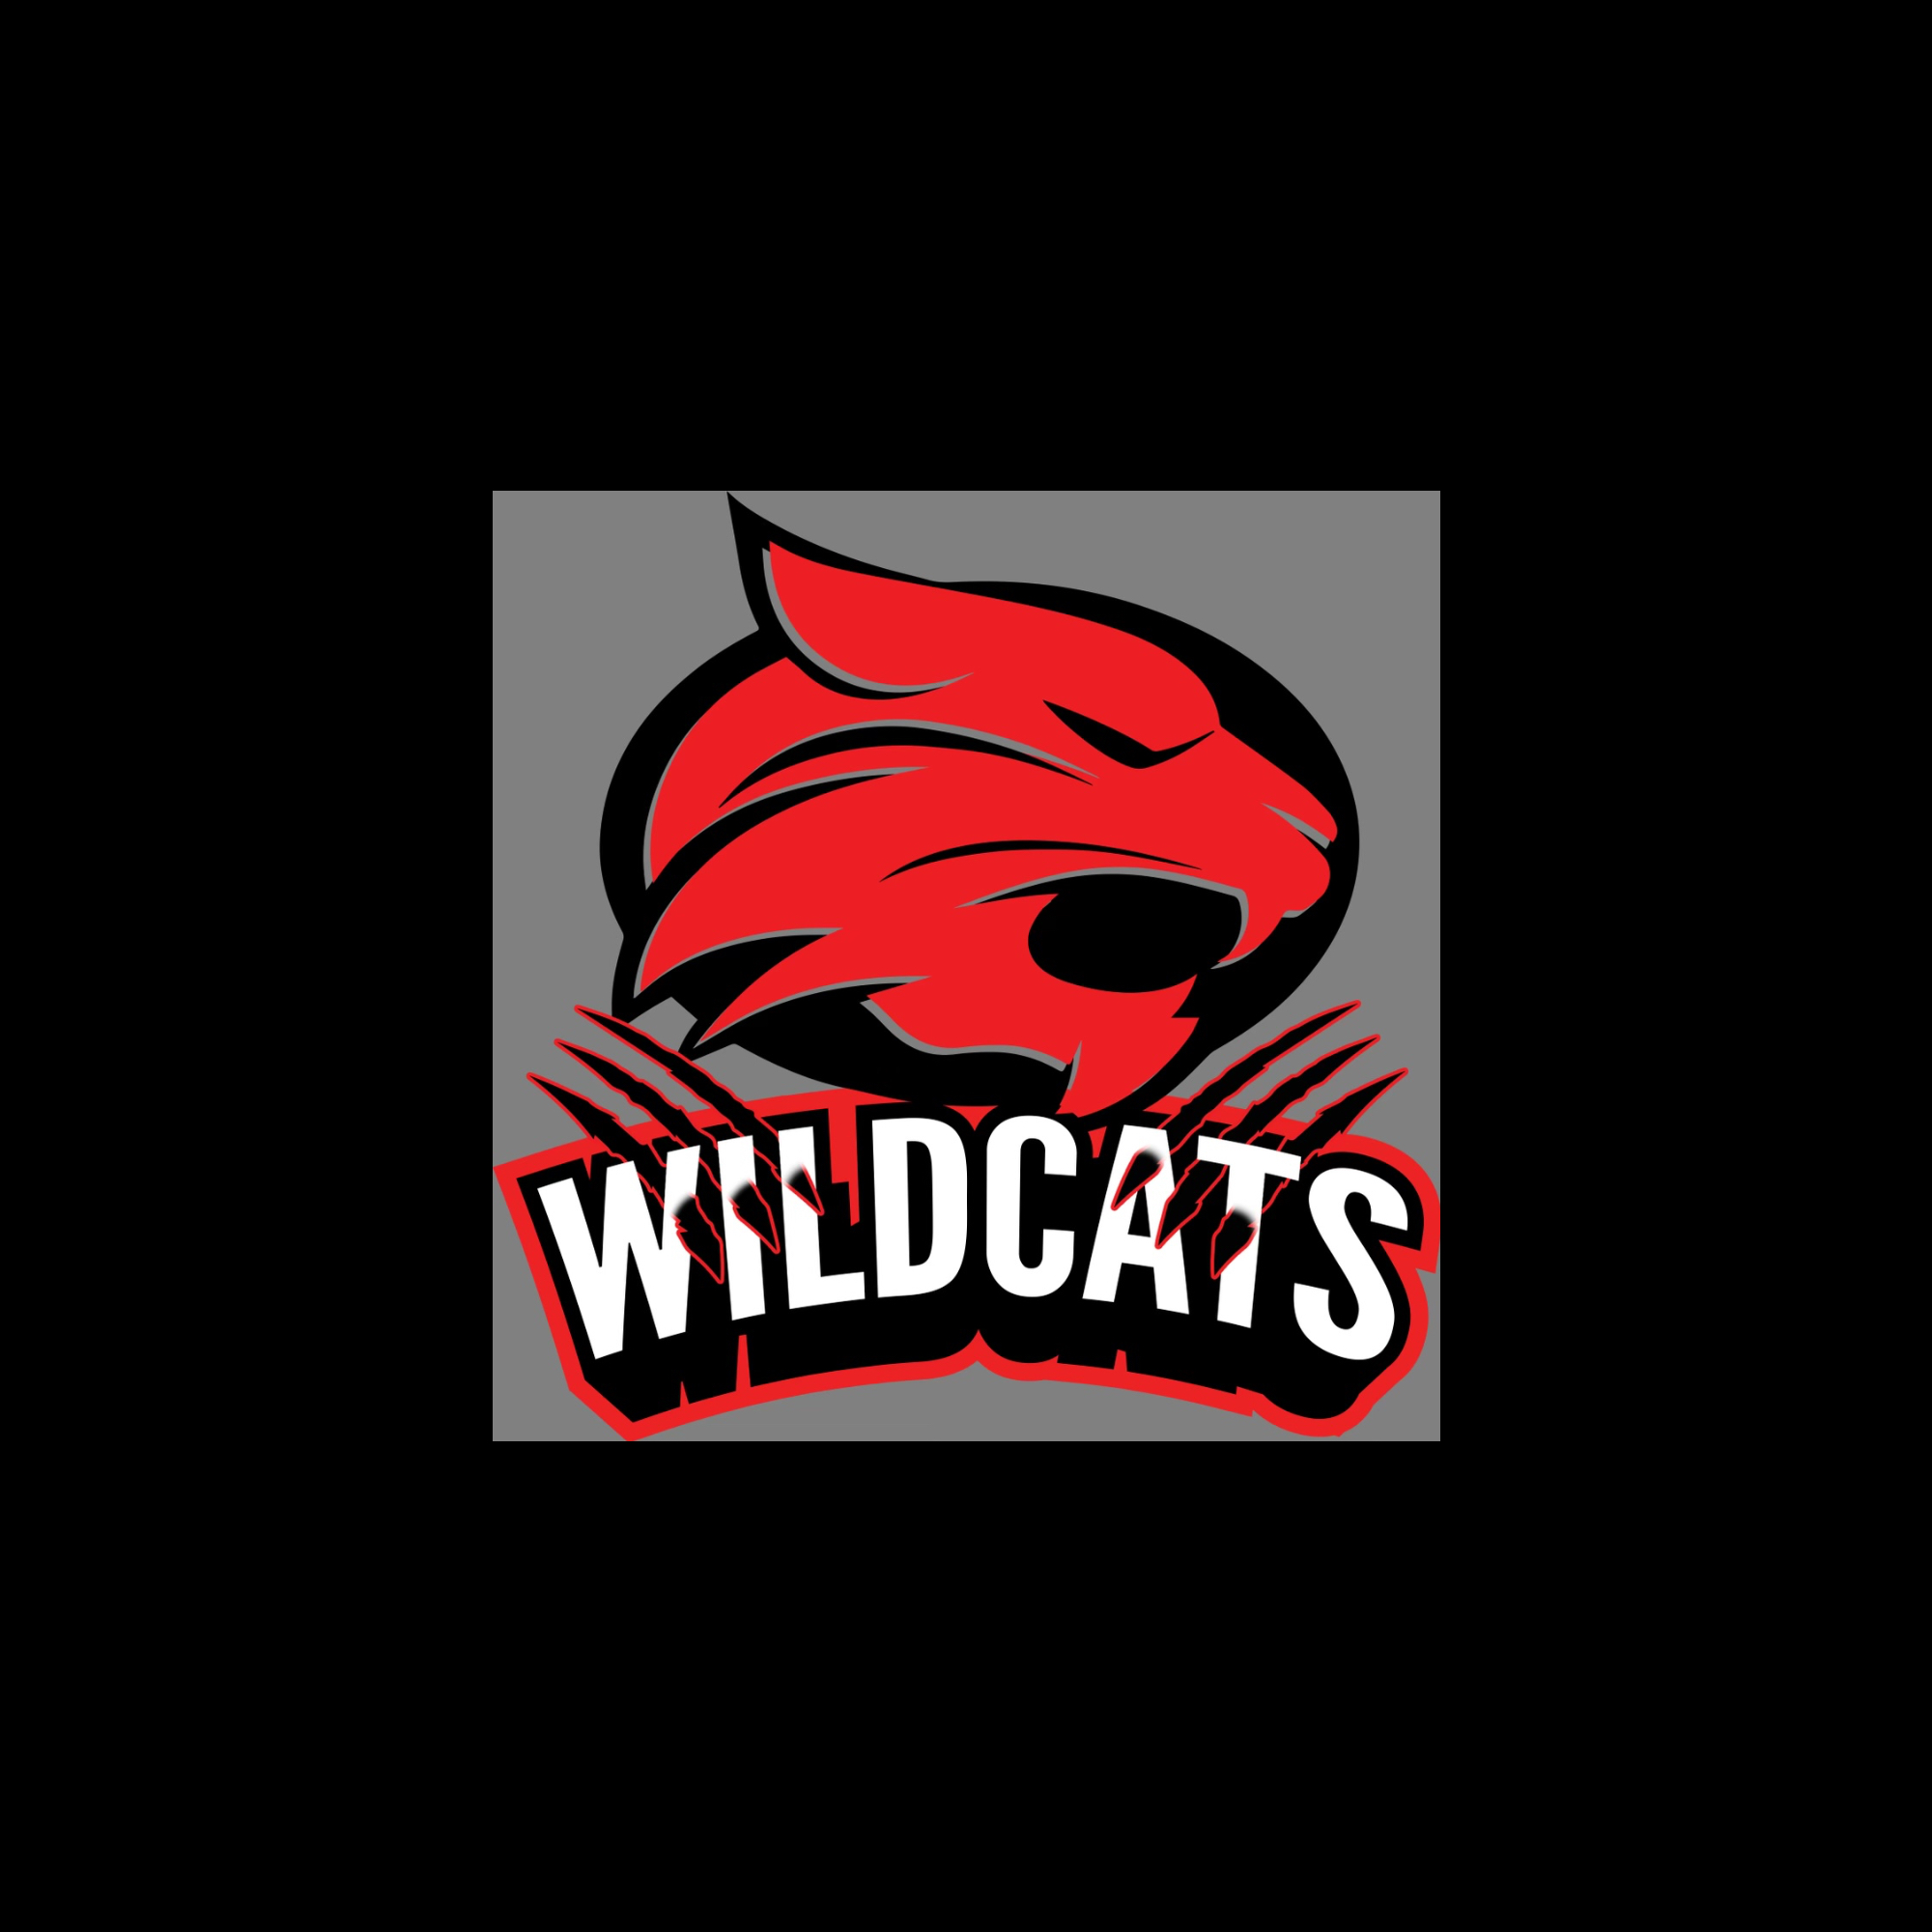 The official logo of Wildcats Elite